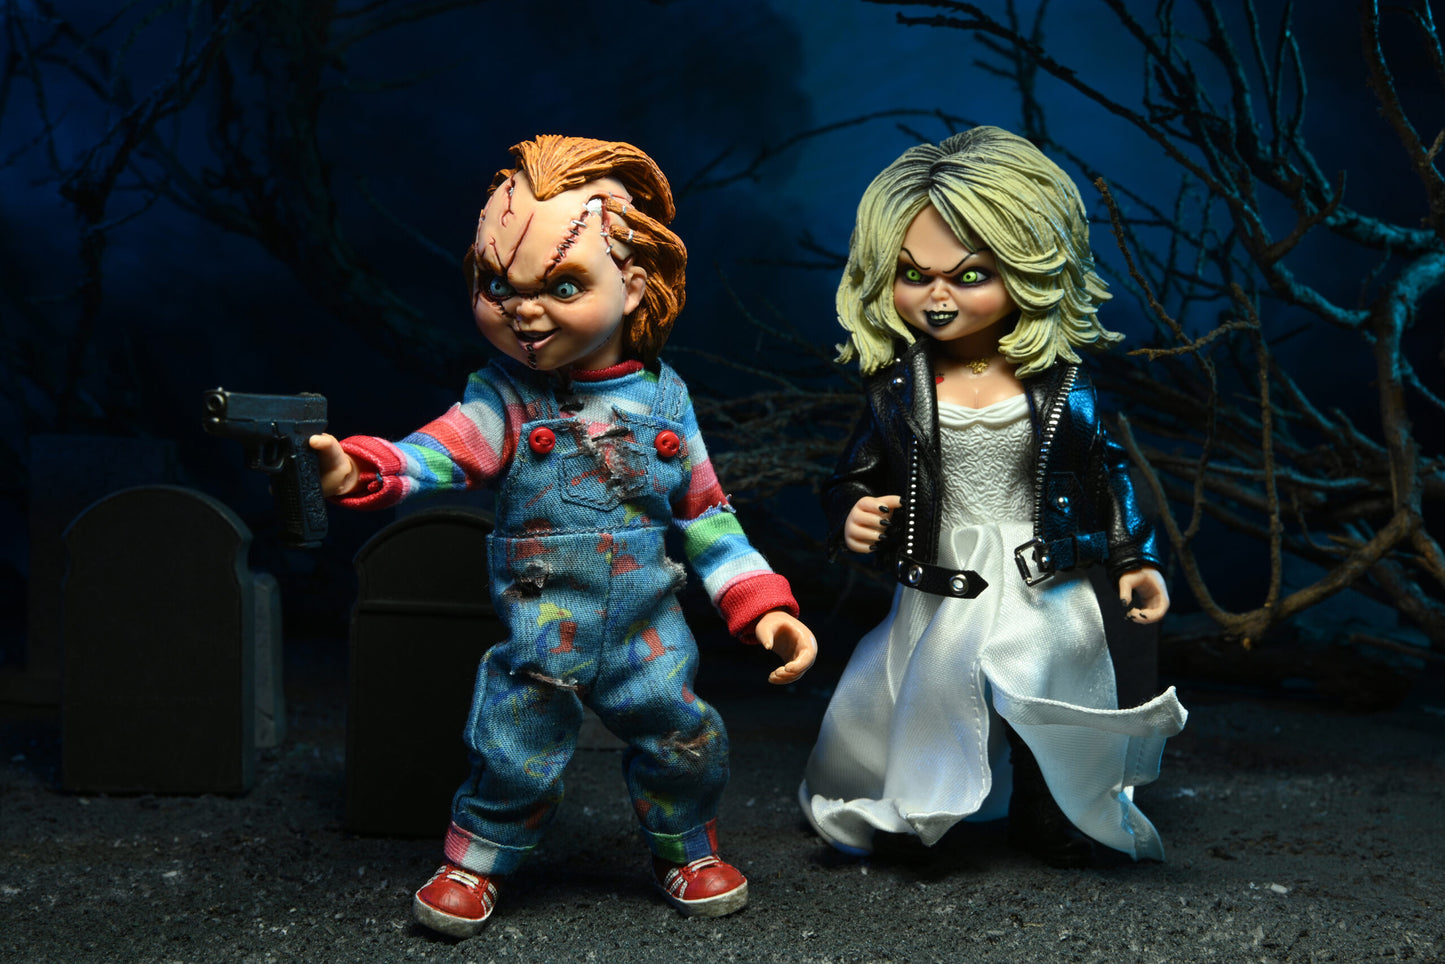 Bride of Chucky 8″ Scale Clothed Figure – Chucky & Tiffany 2-Pack